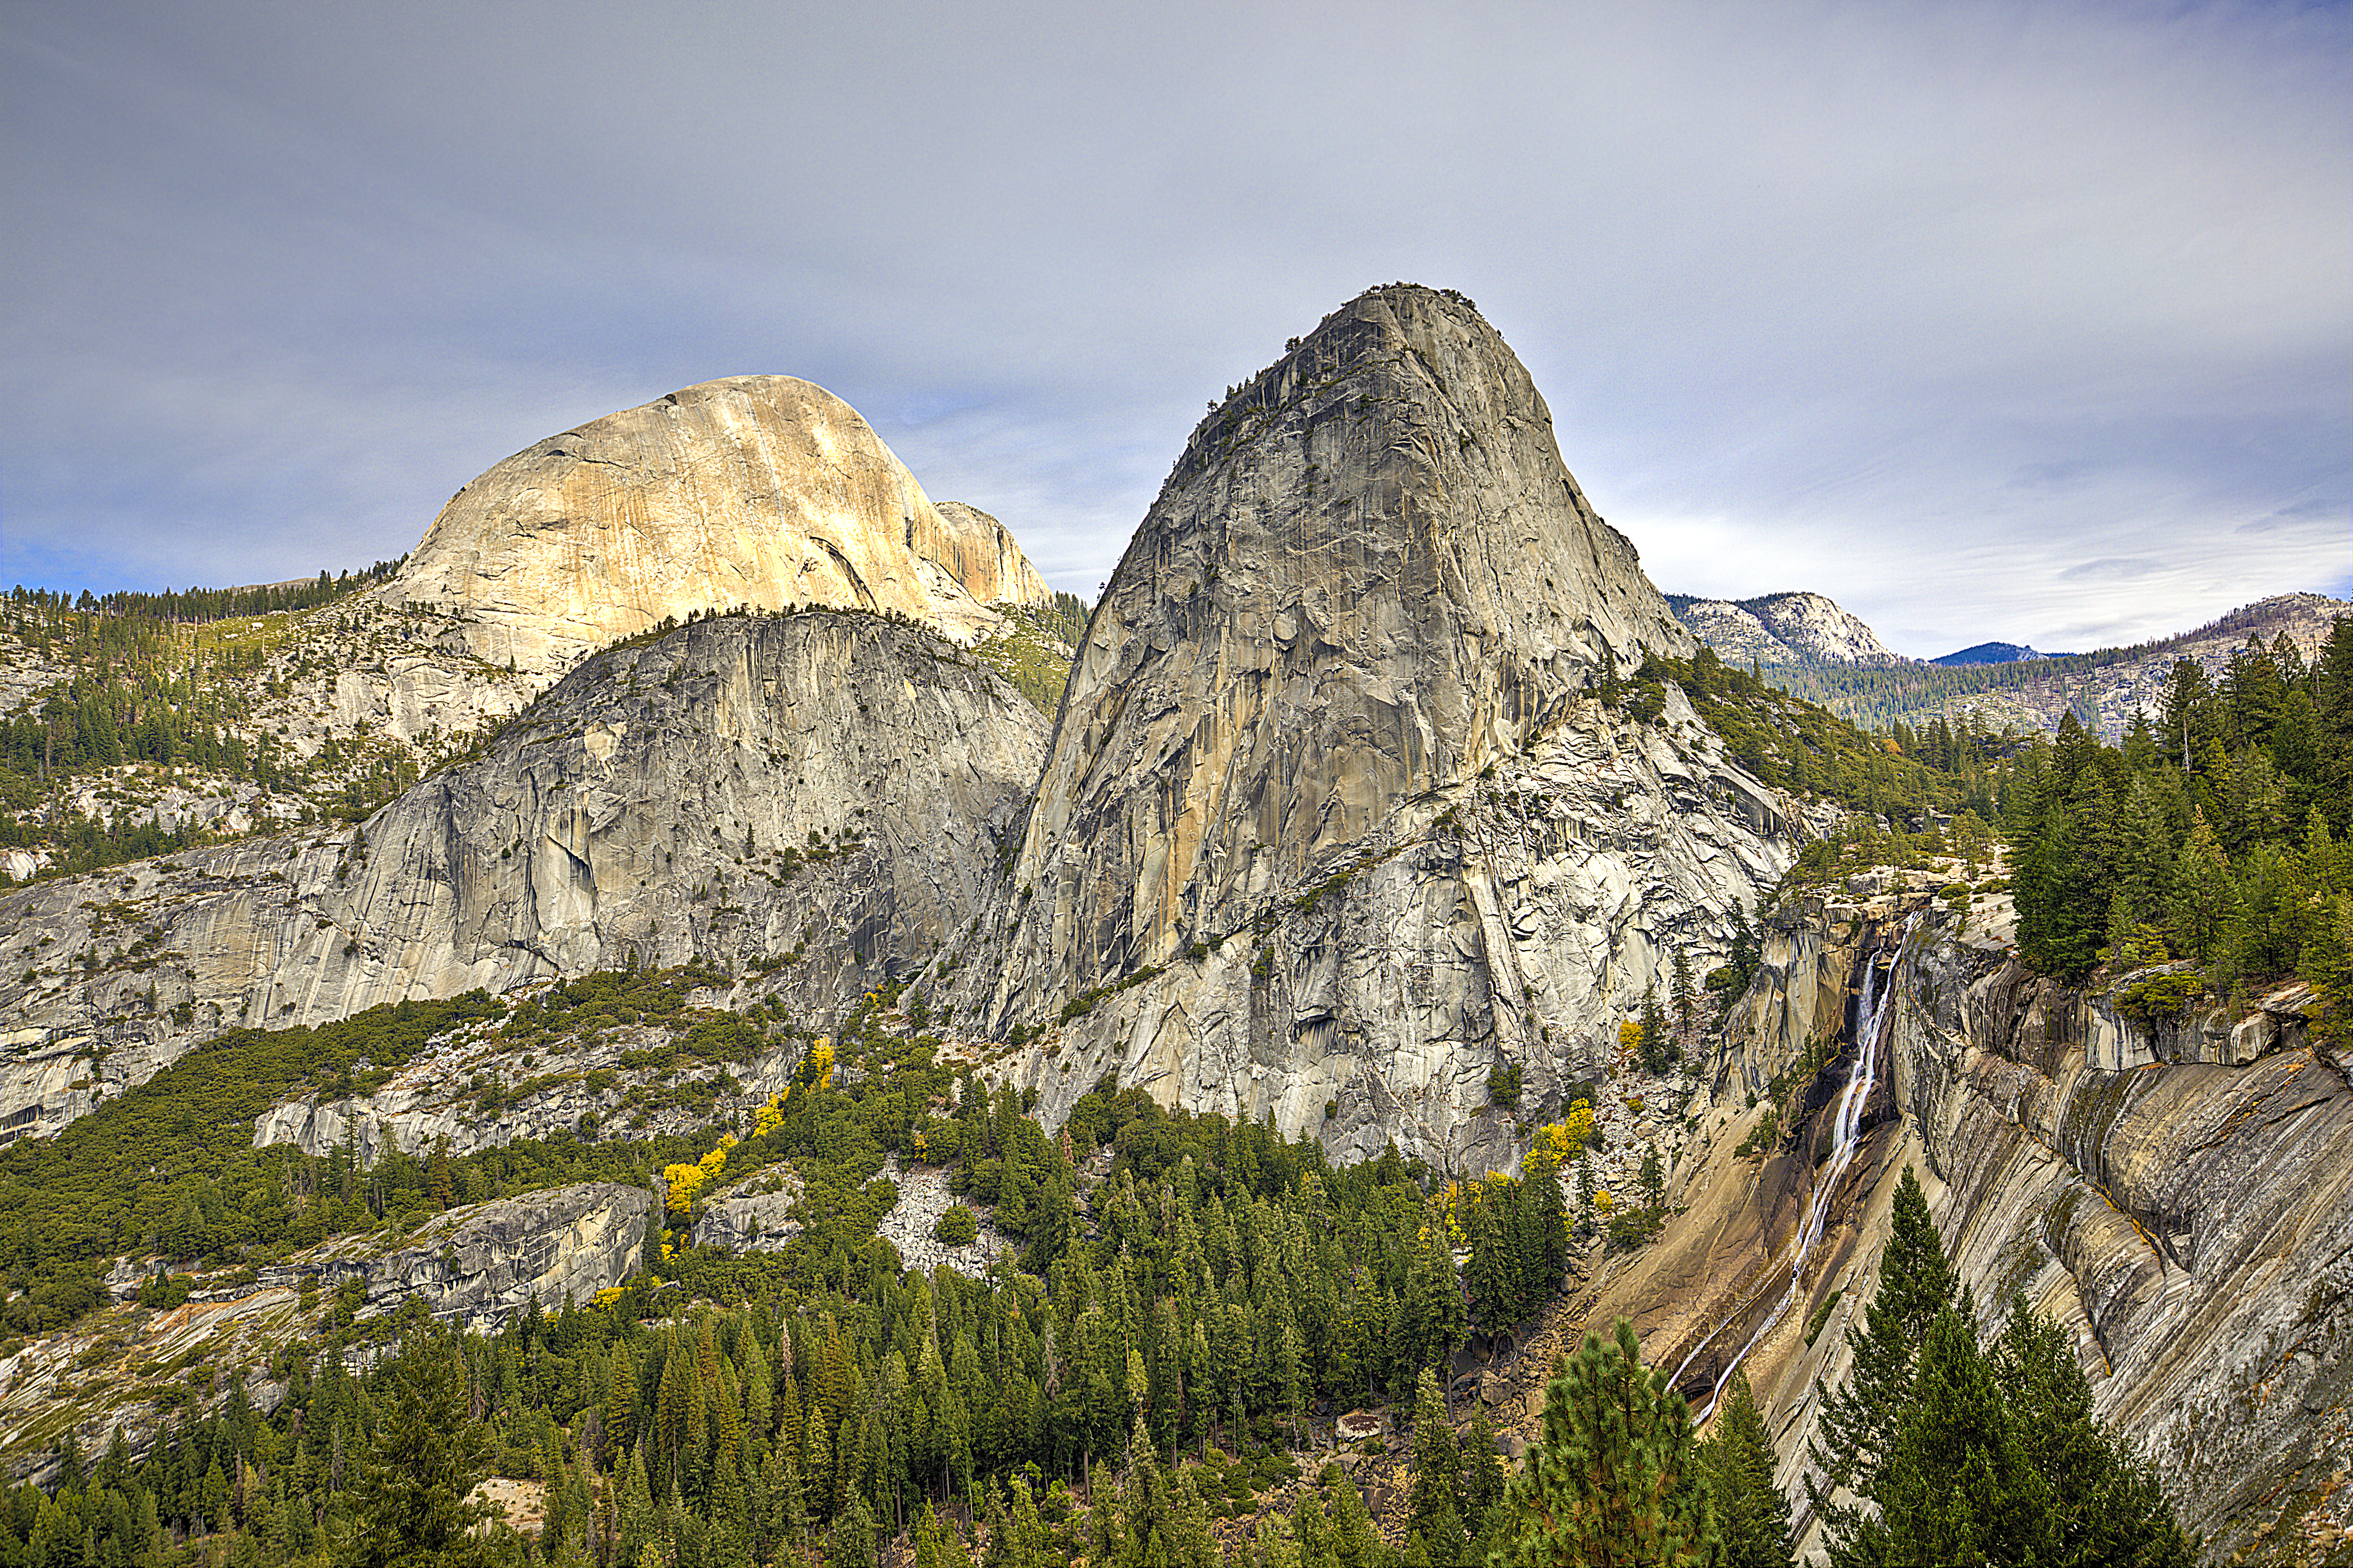 Nevada Falls and the Liberty Cap.  Taken near the juncture between the Mist Trail and the John Muir Trail.